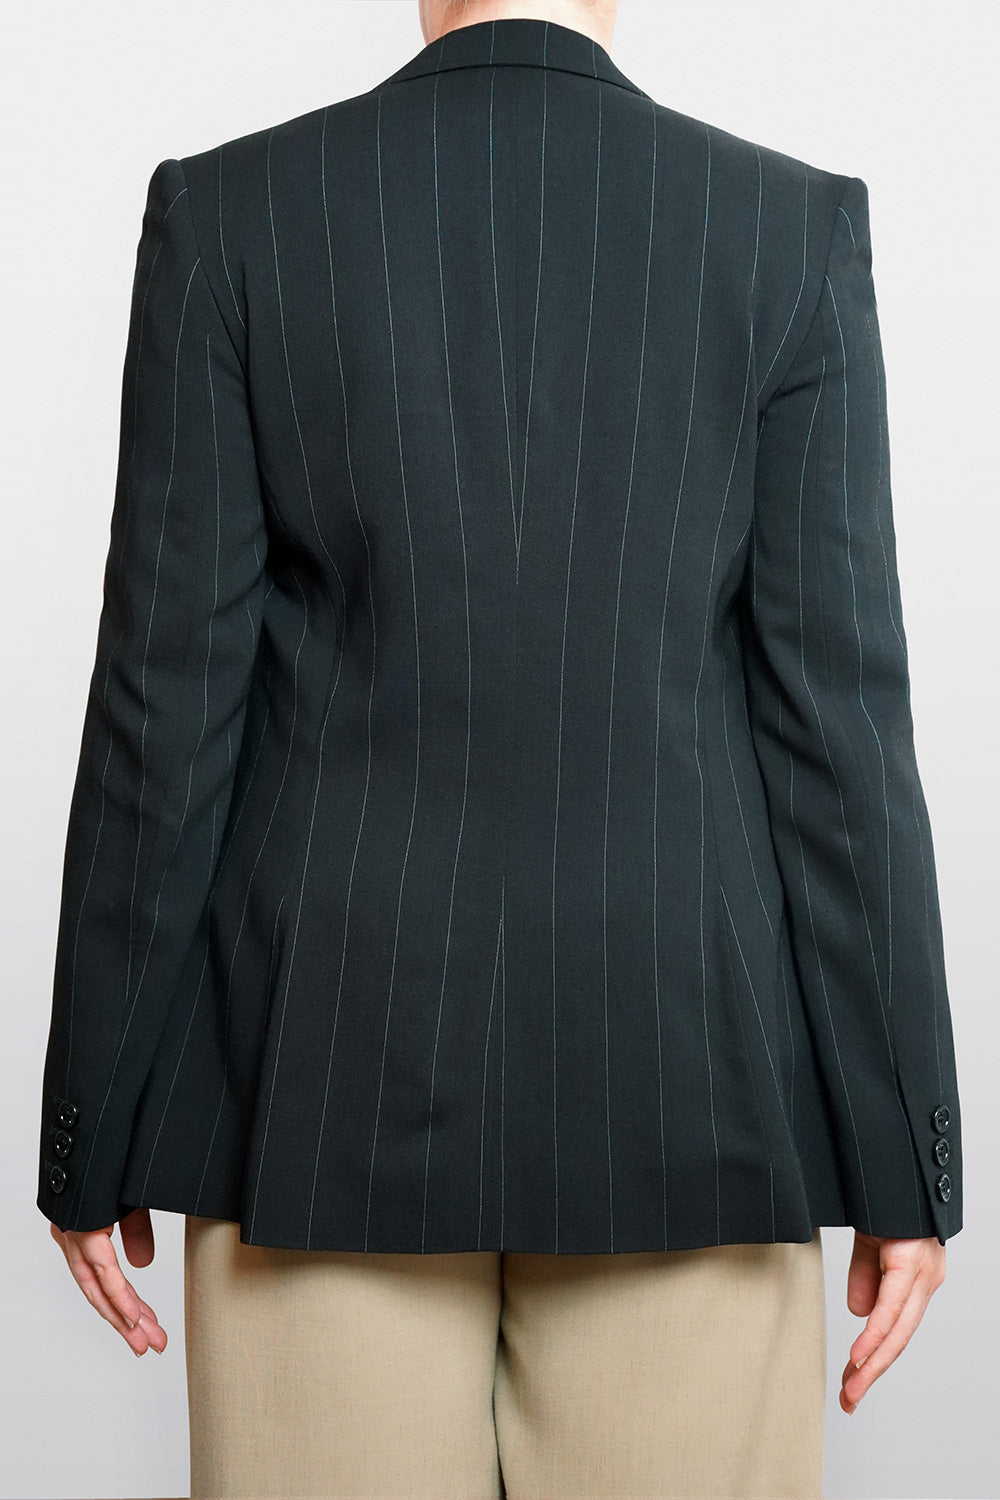 Dolce & Gabbana Pre-Owned Double Breasted Pinstripe Blazer Size 6-8